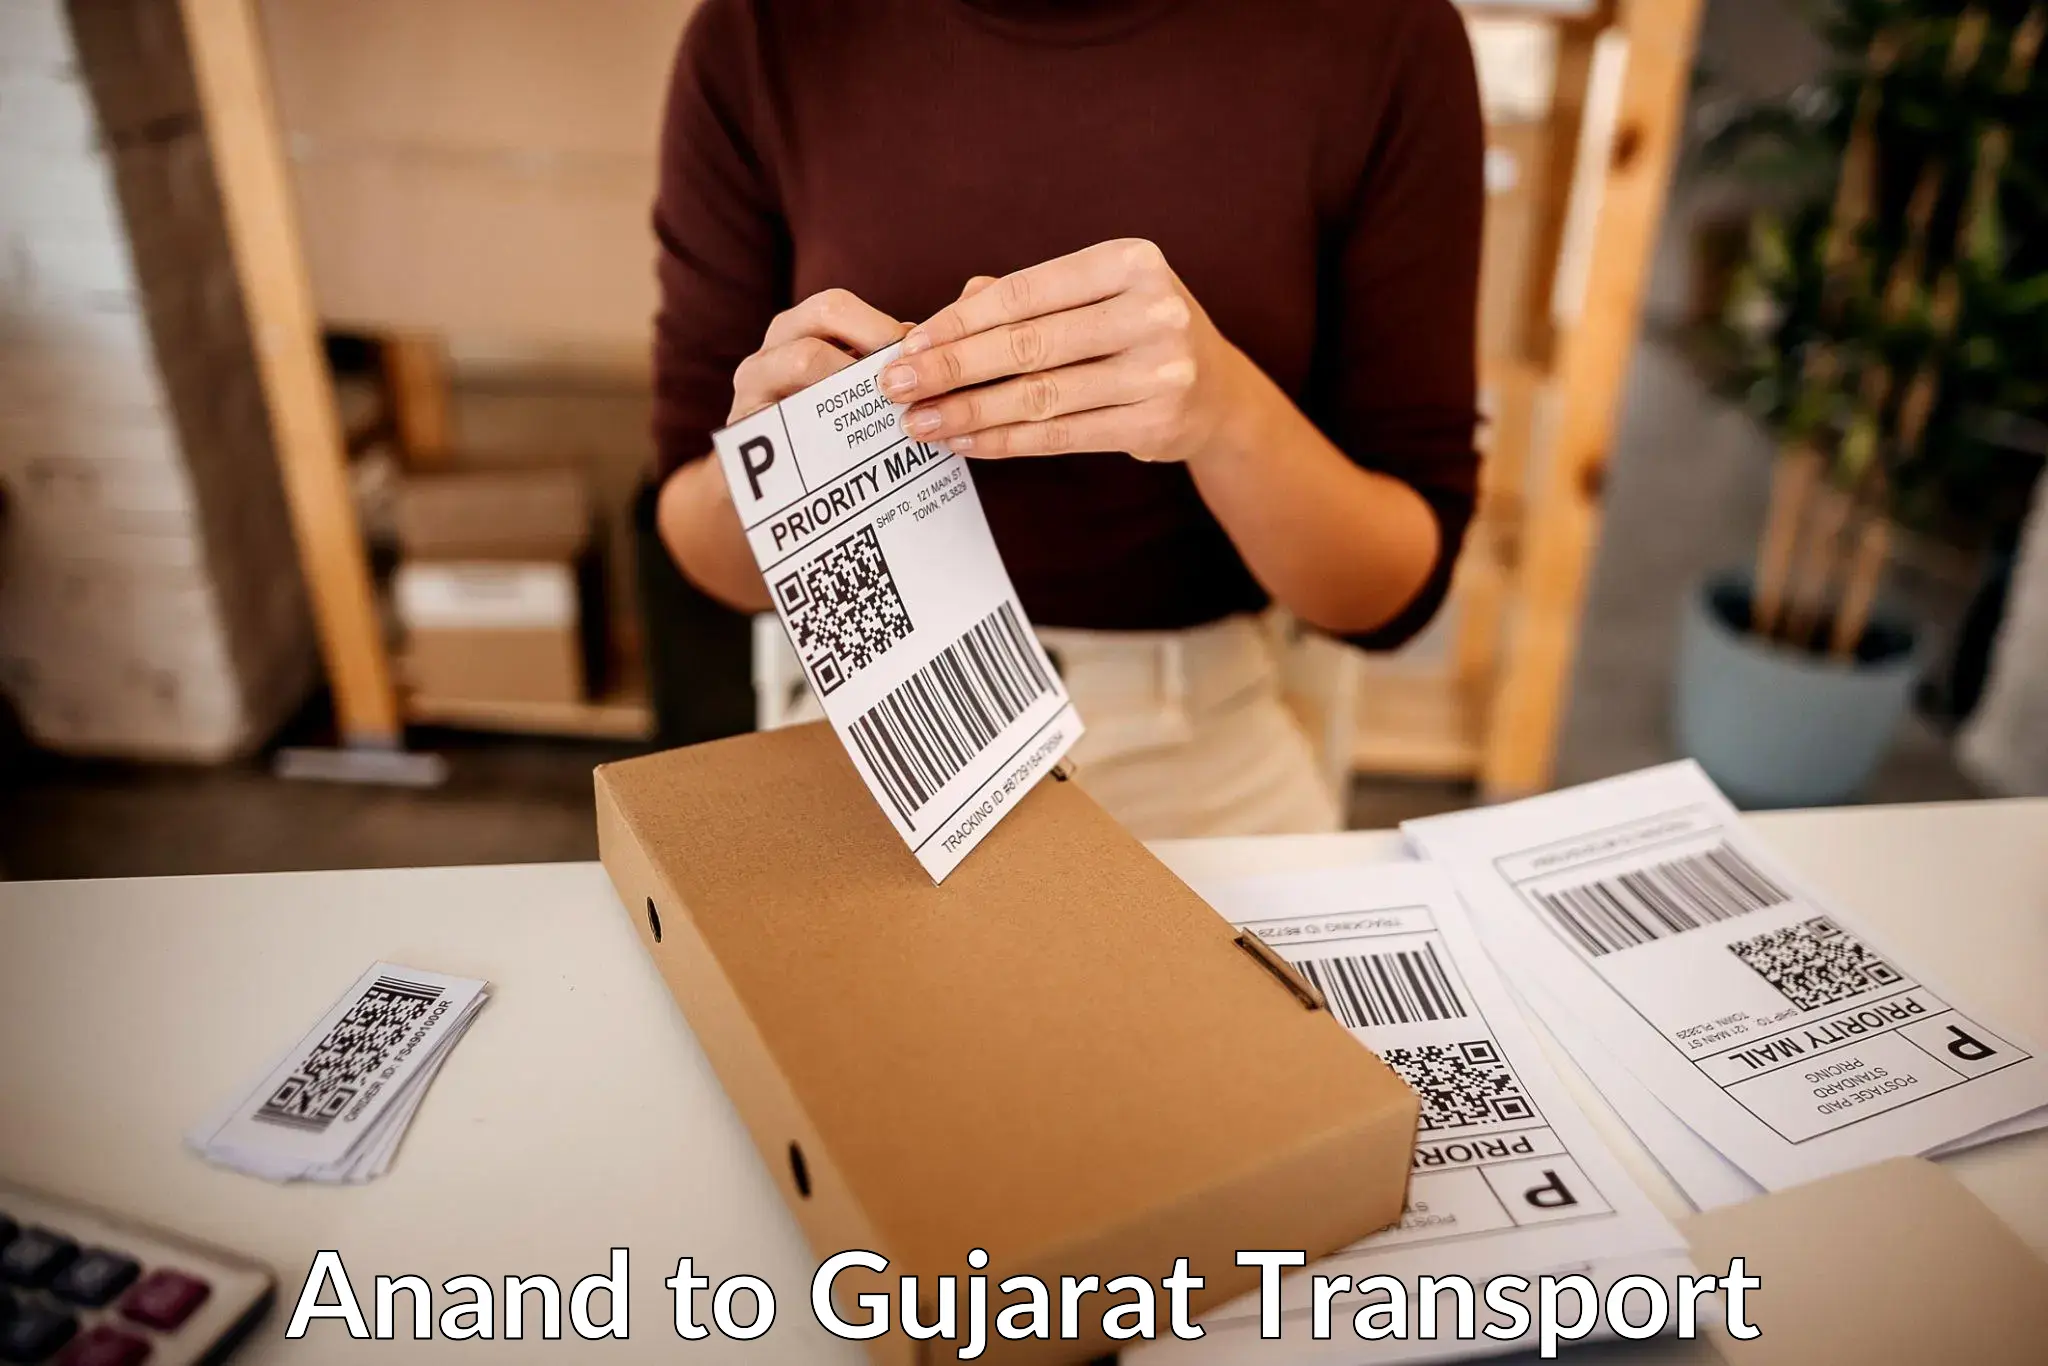 Delivery service Anand to Gujarat